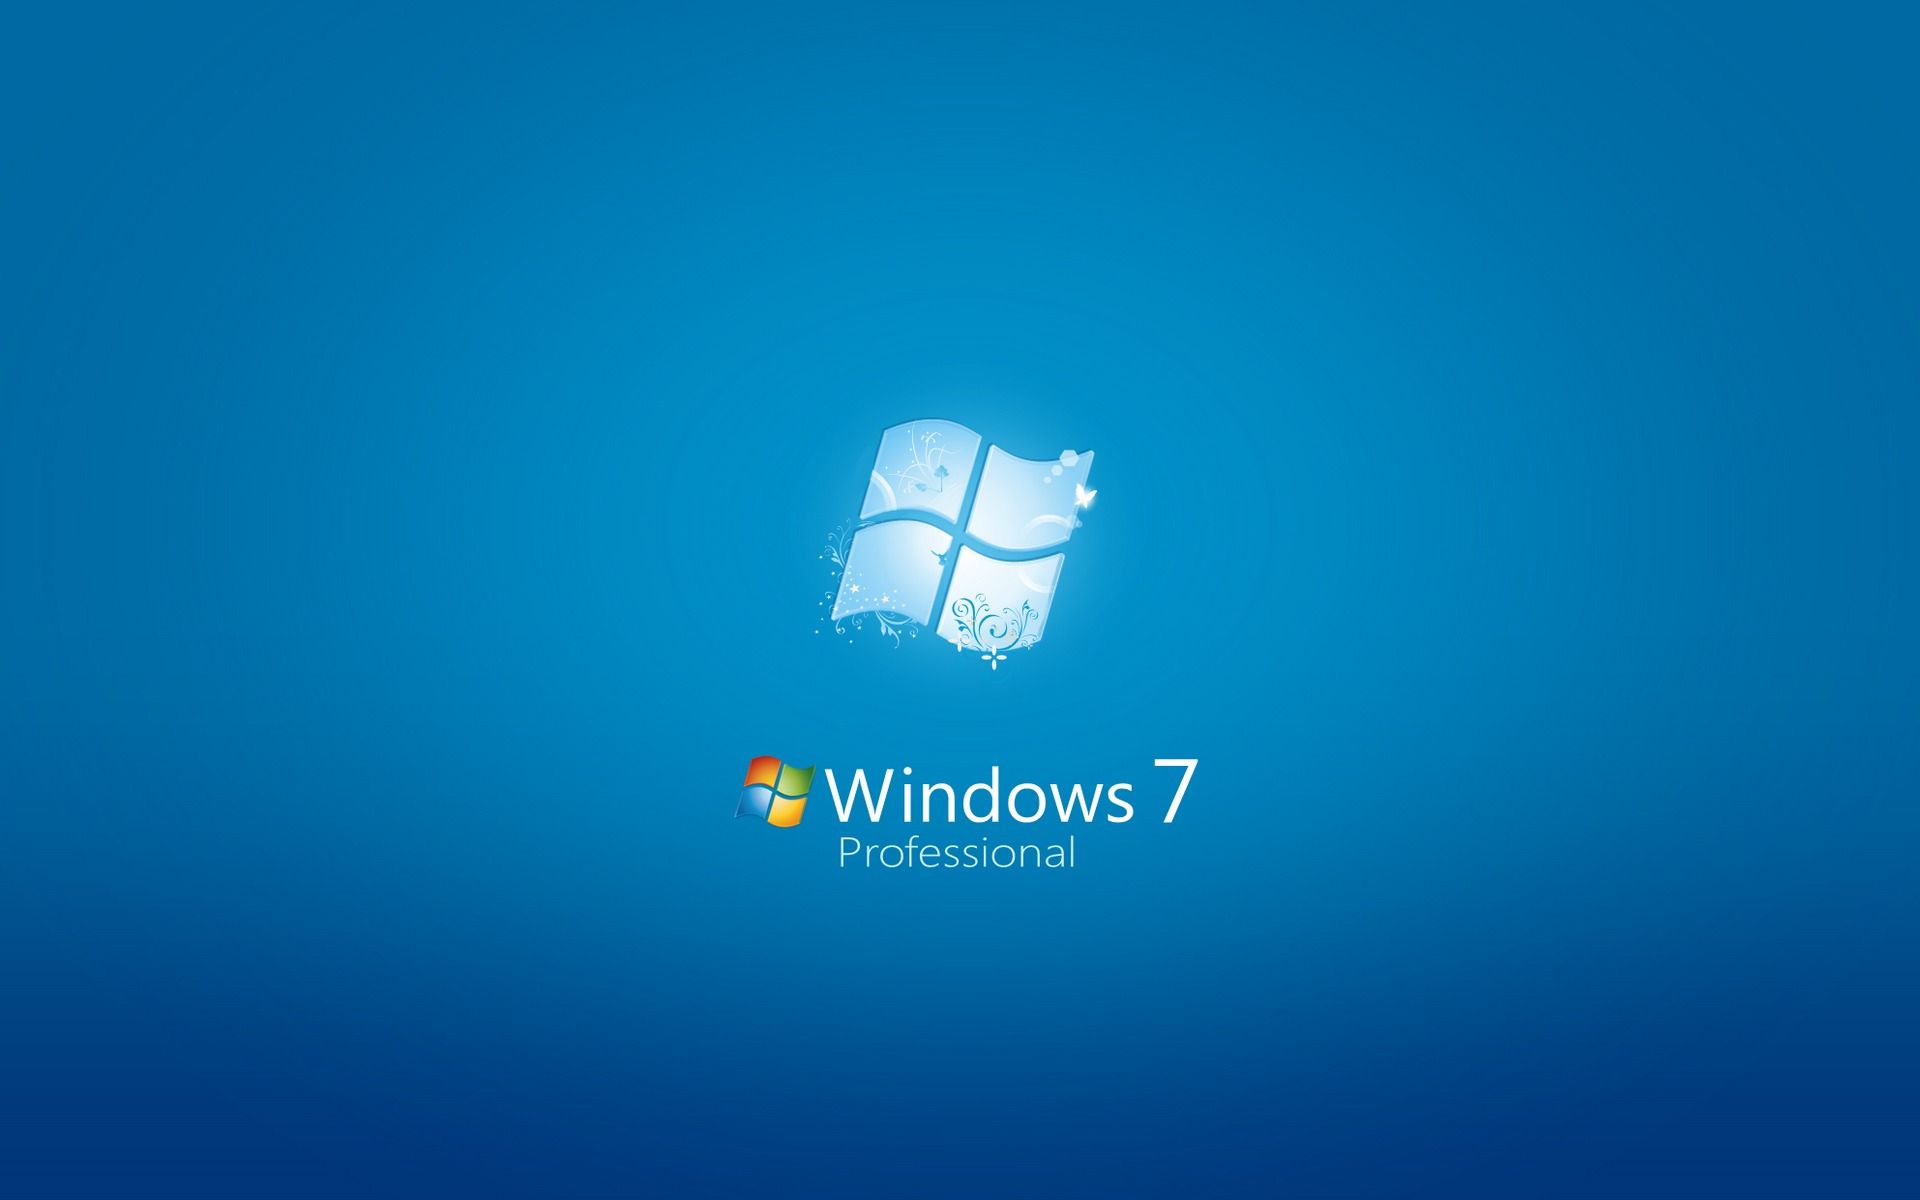 Windows 7 Professional Wallpapers | HD Wallpapers